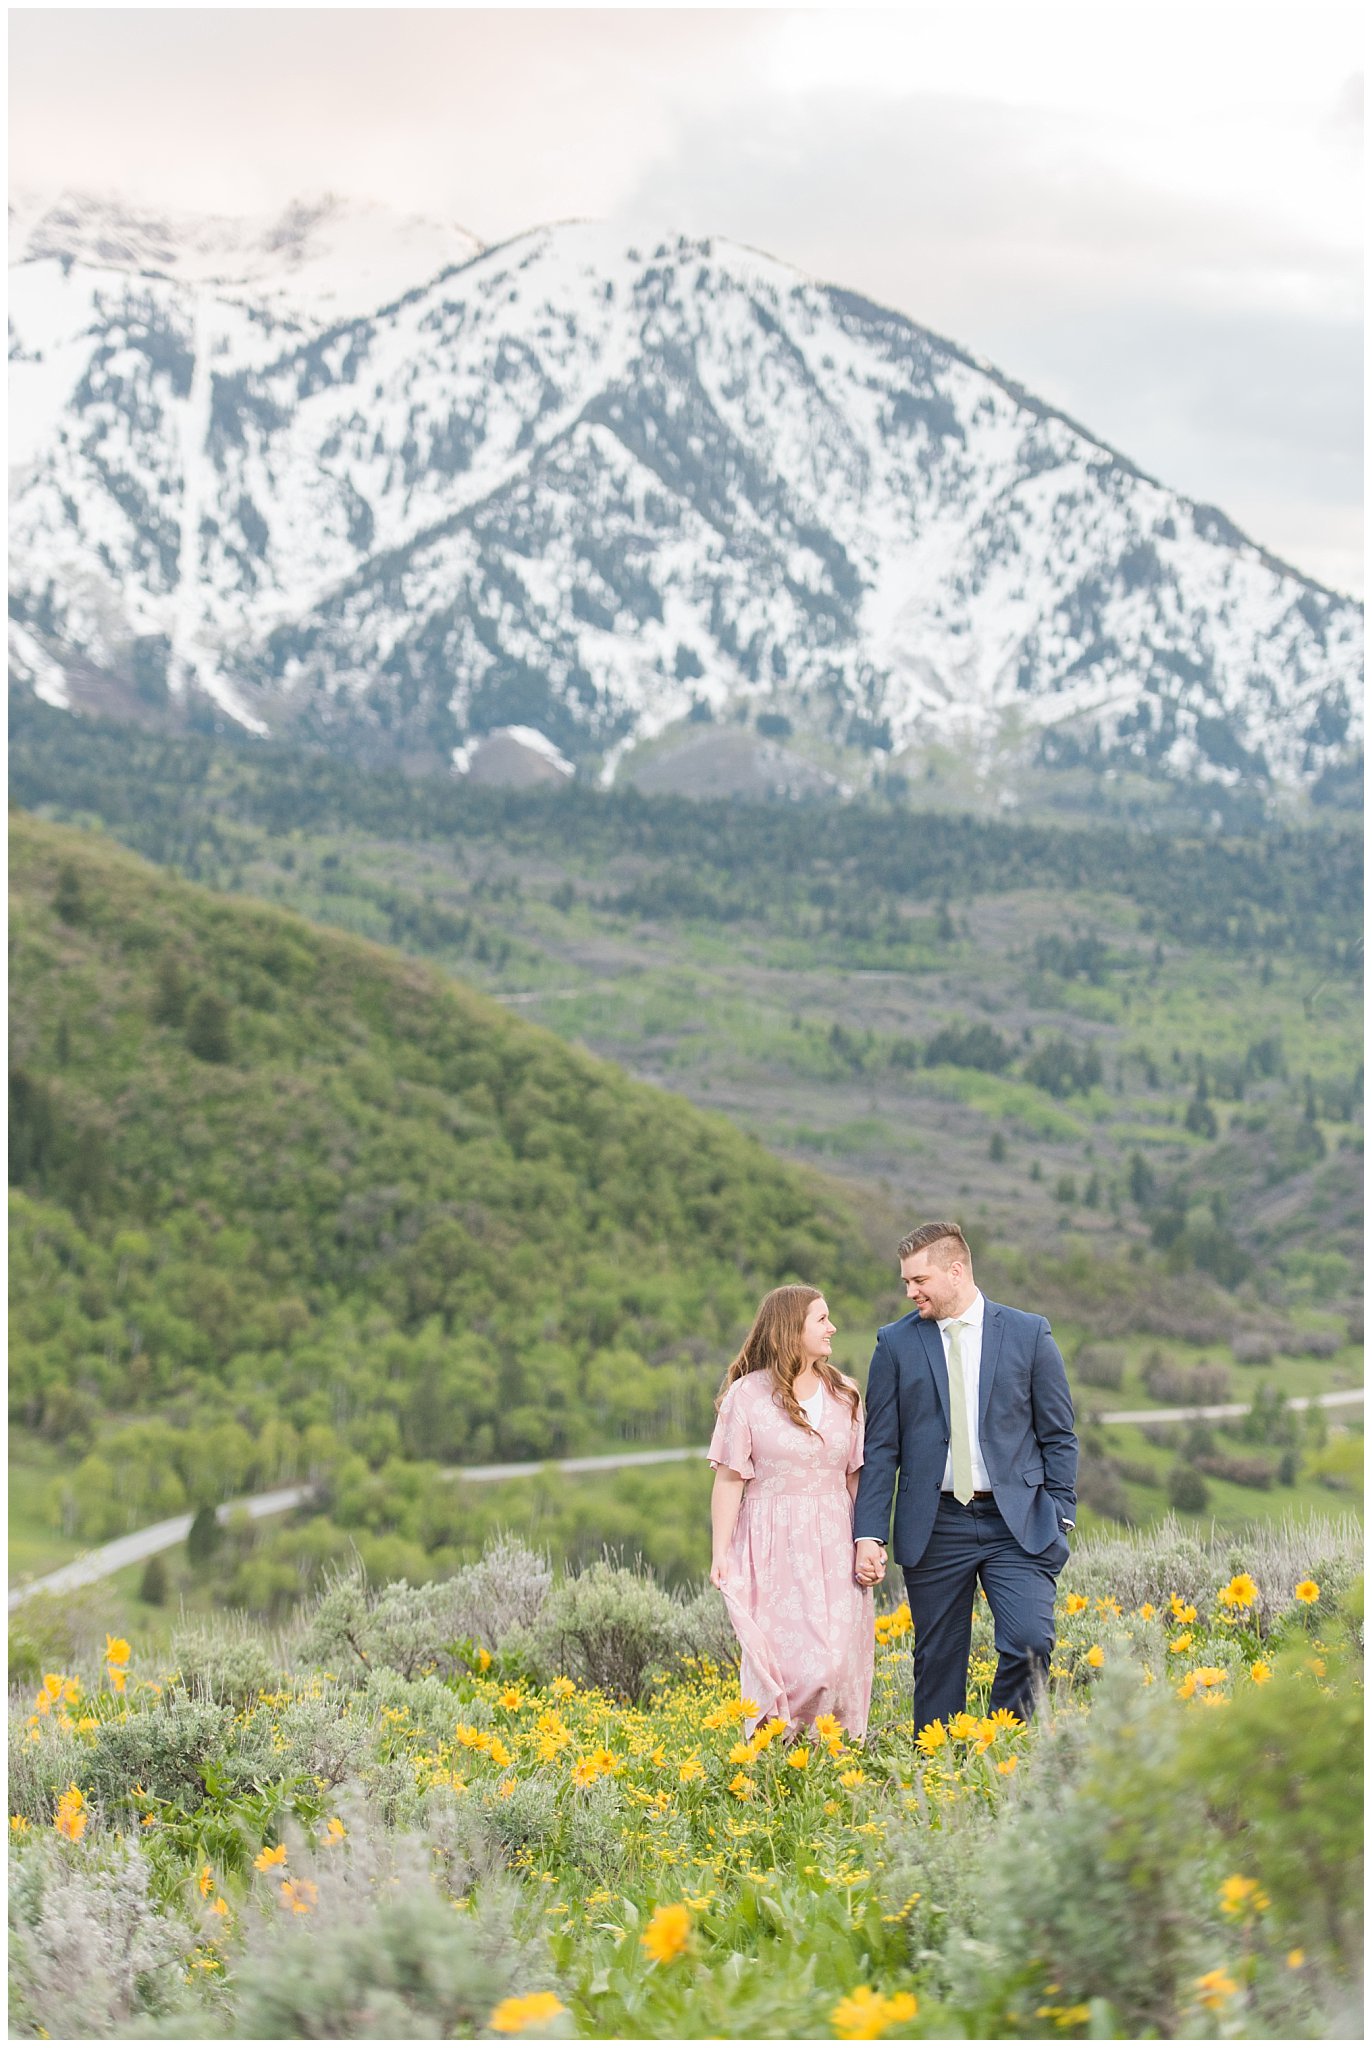 Couple dressed in blush dress and blue suit surrounded by sunflowers and snowy mountains | Ogden Valley Spring Mountain Engagement | Jessie and Dallin Photography